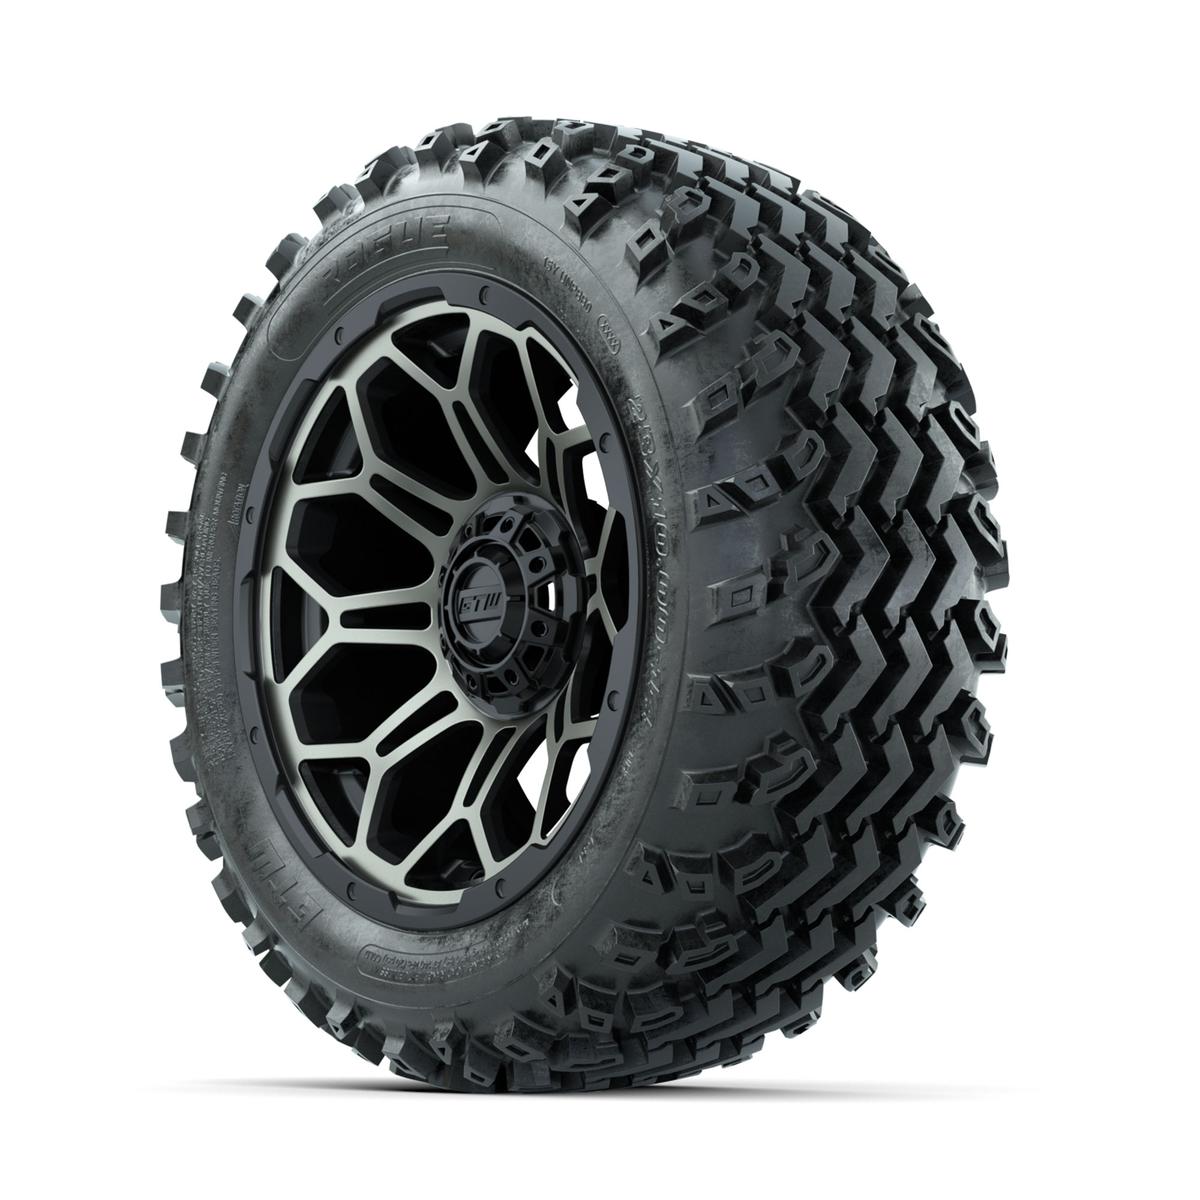 GTW Bravo Bronze/Black 14 in Wheels with 23x10.00-14 Rogue All Terrain Tires – Full Set